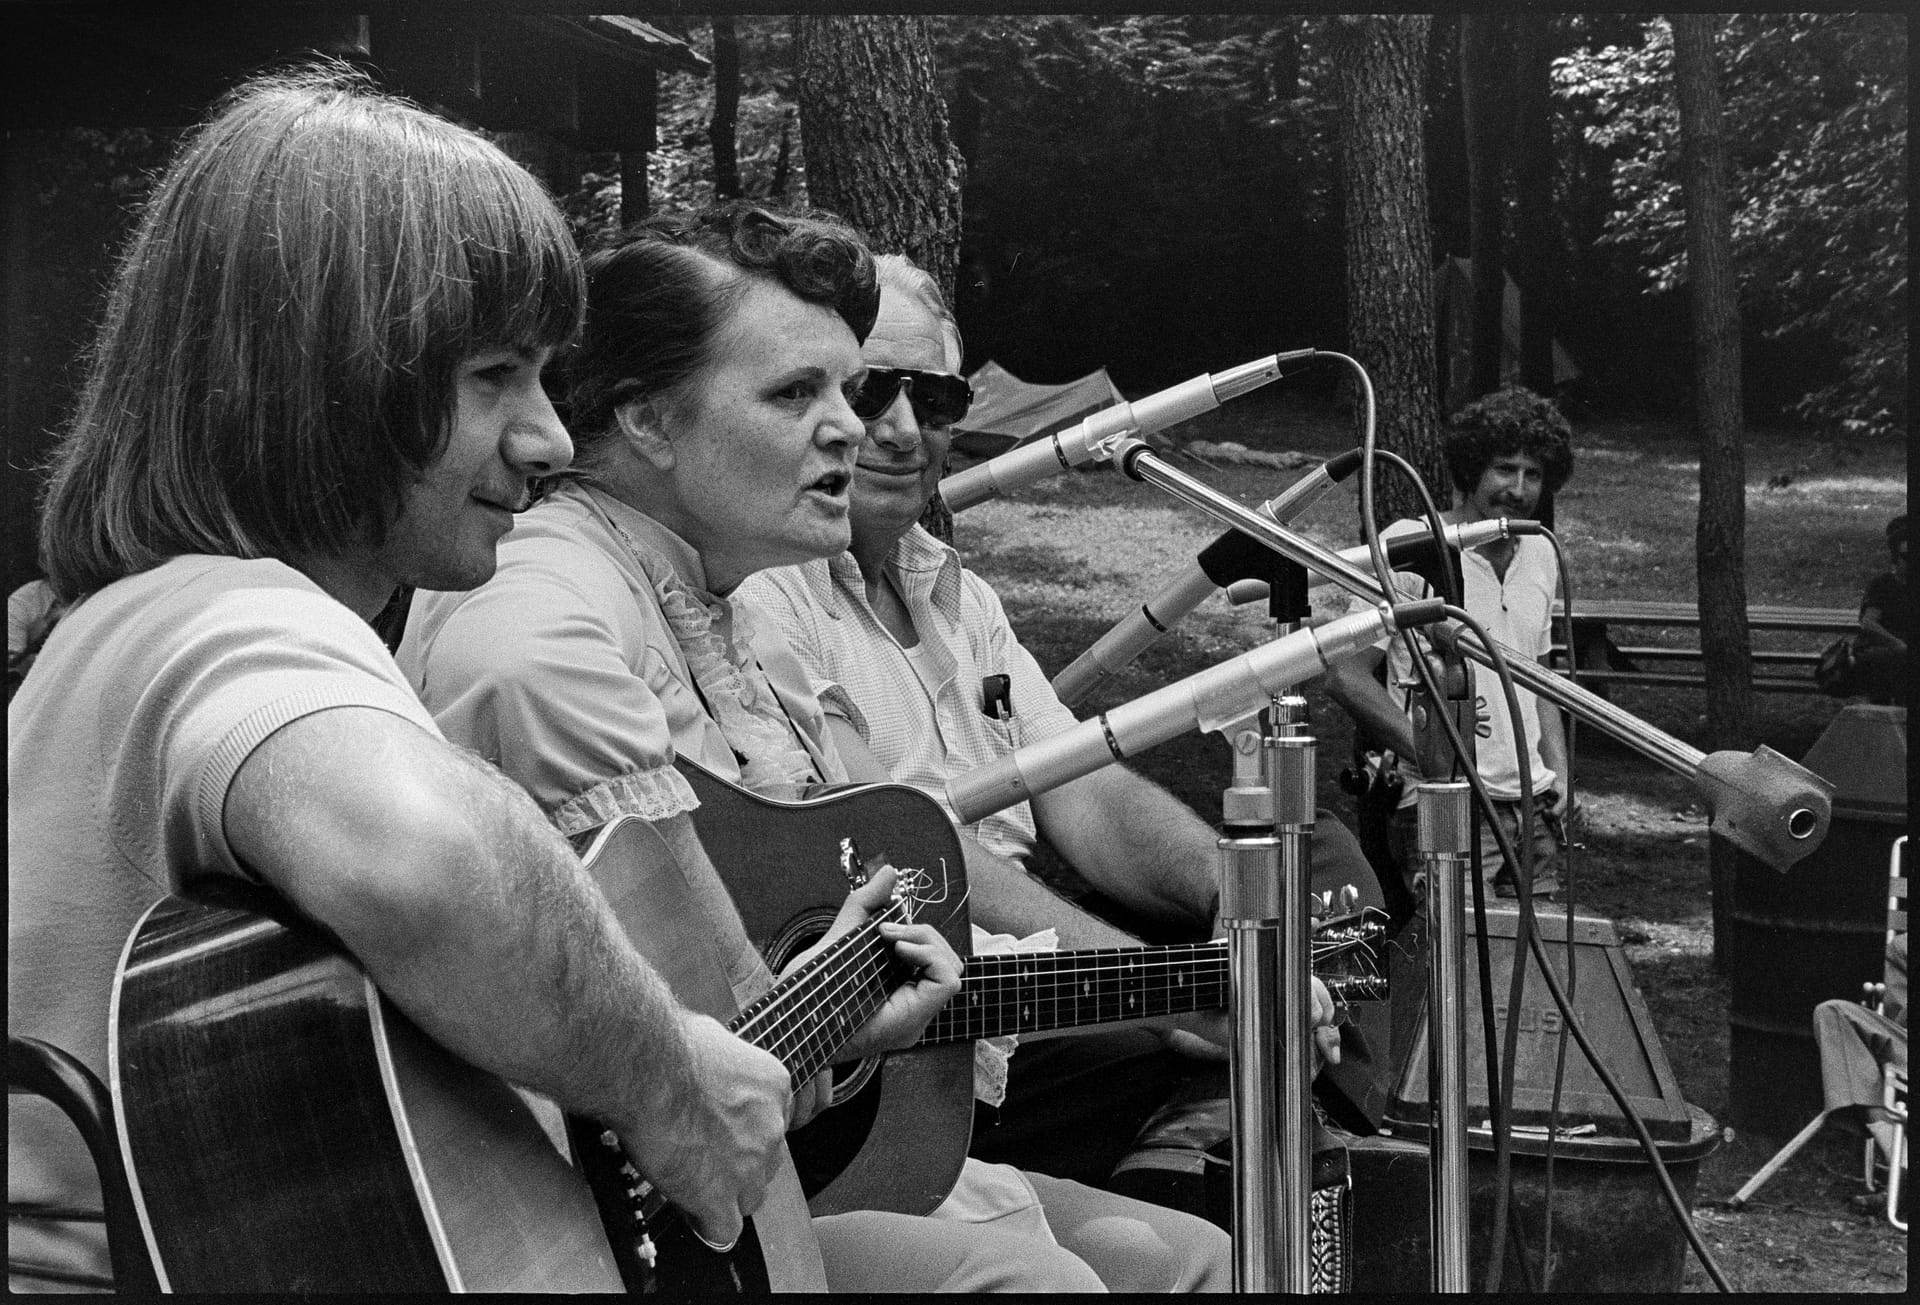 In an old black-and-white photograph, a trio of musicians sing and play guitars